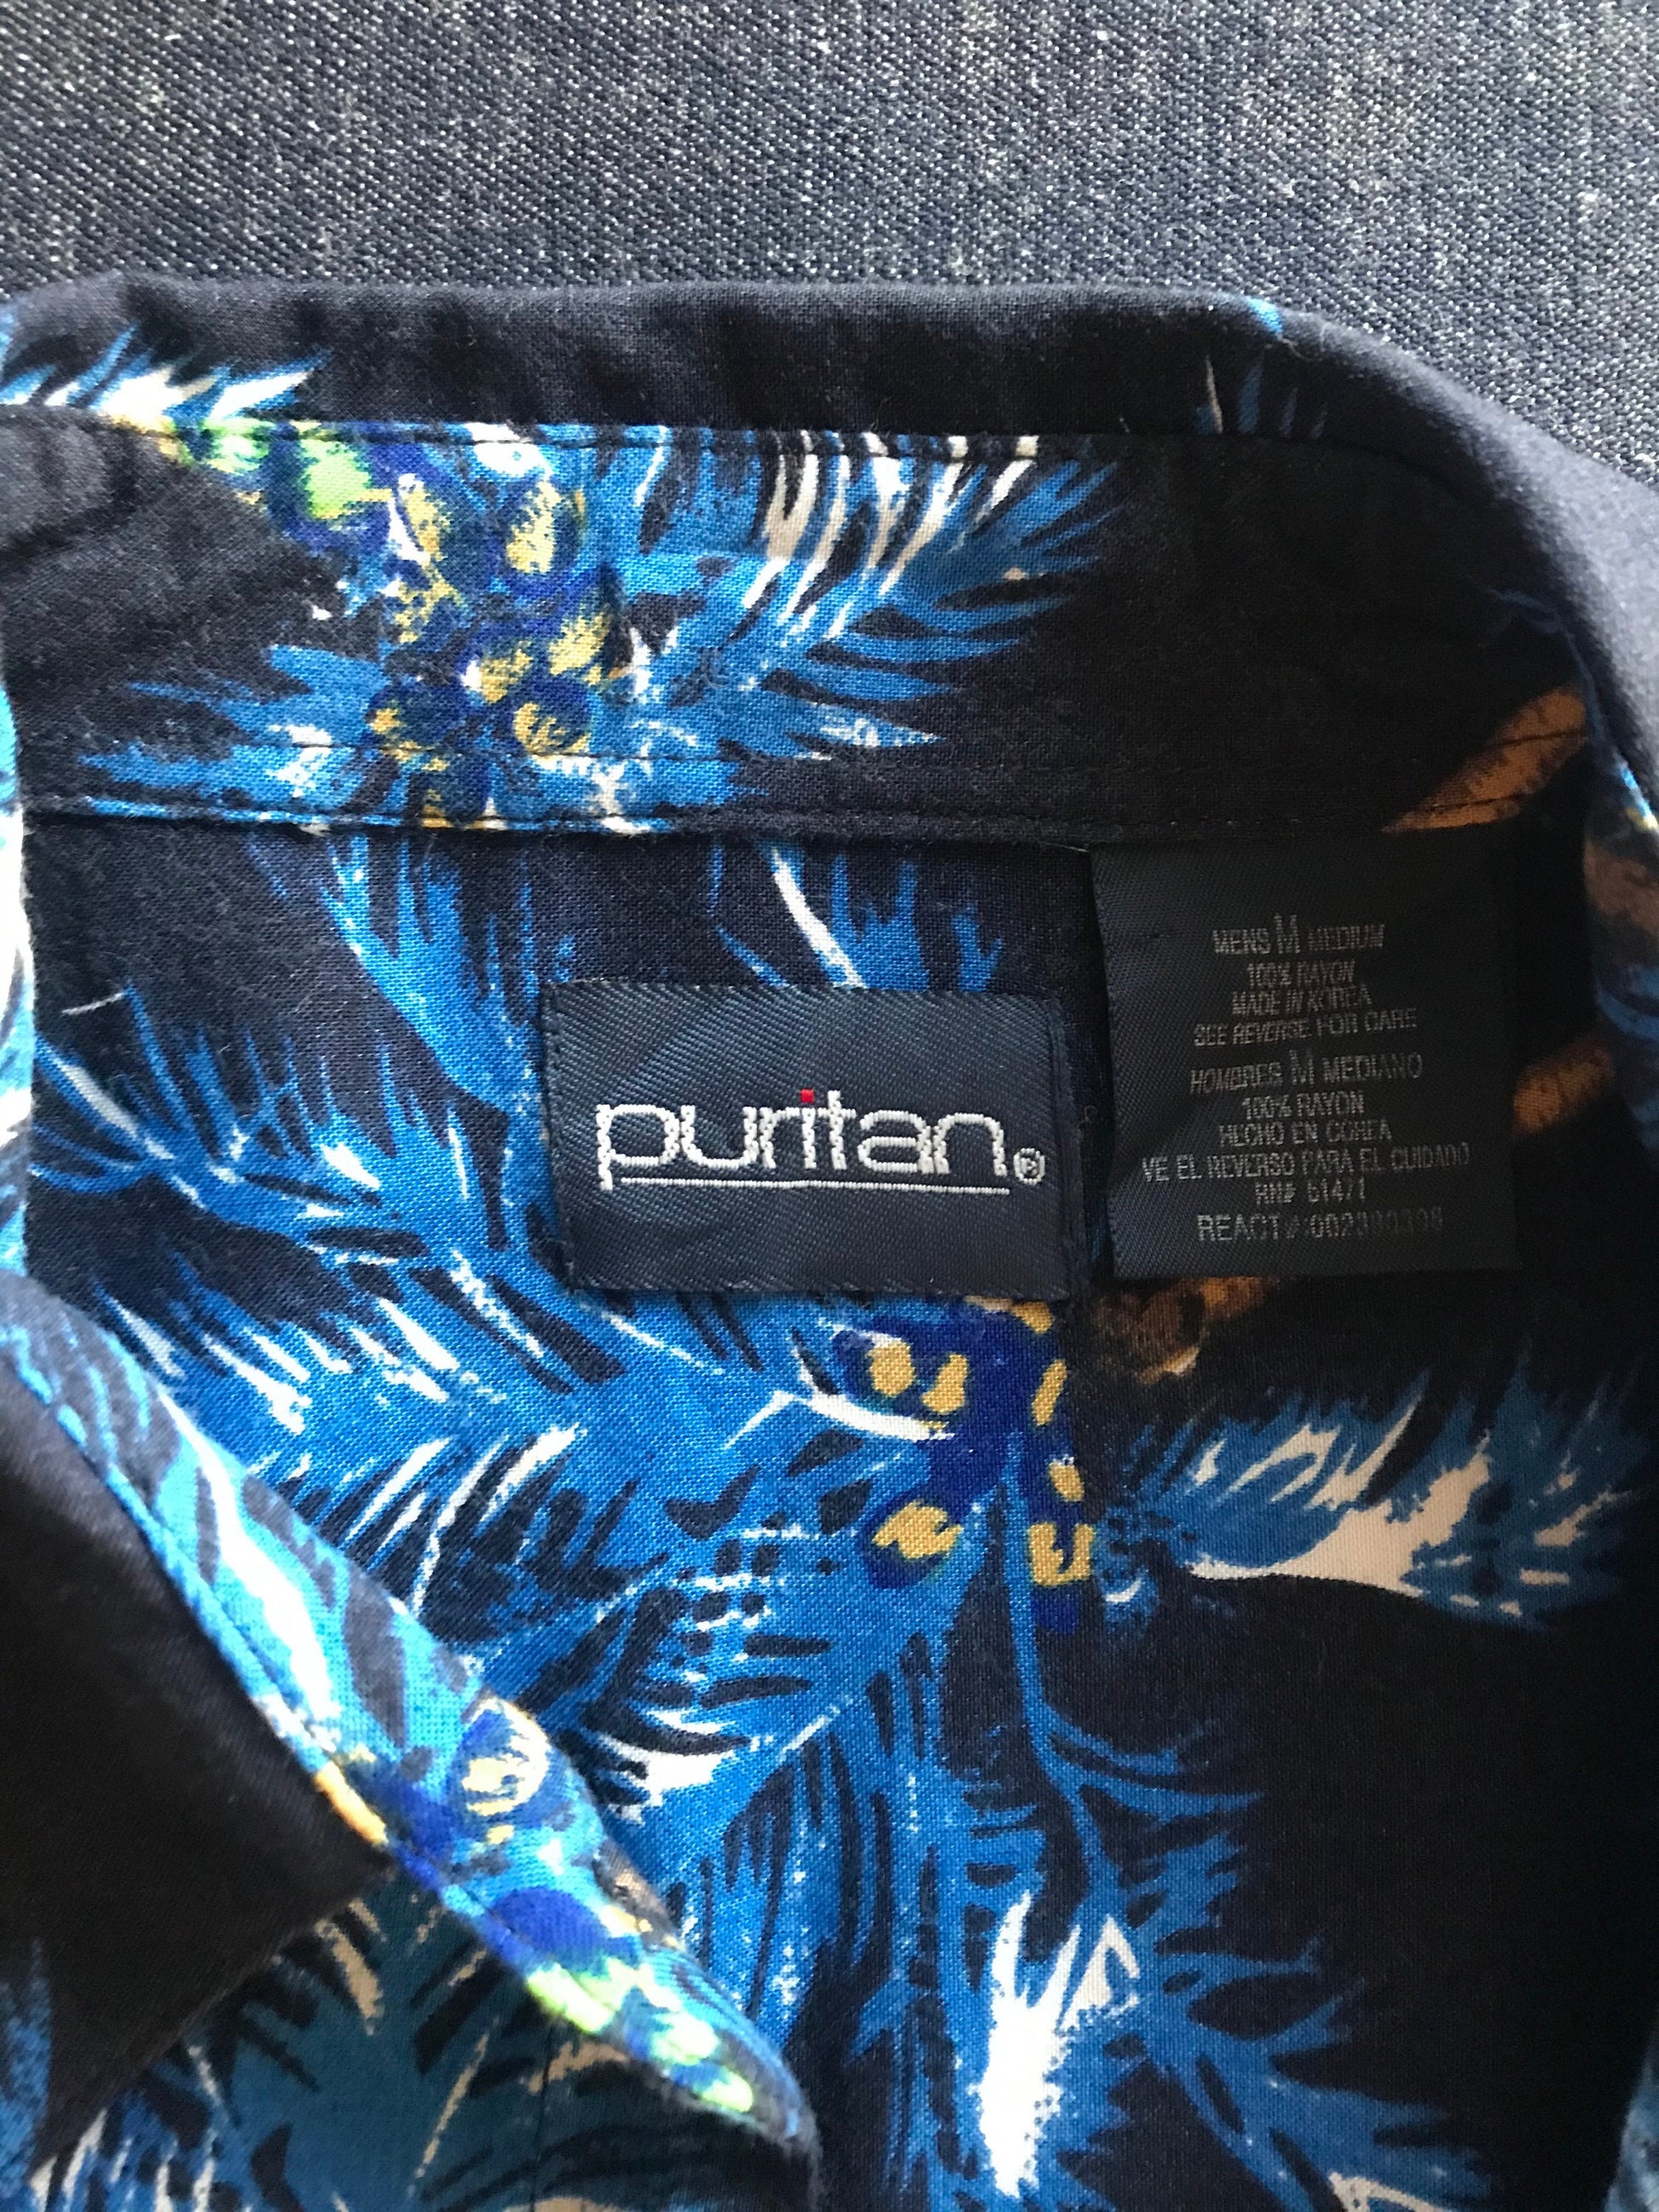 Vintage 90s Hawaiian rayon shirt by Puritan, size Medium - Authentic tropical flair and lightweight comfort for your wardrobe.